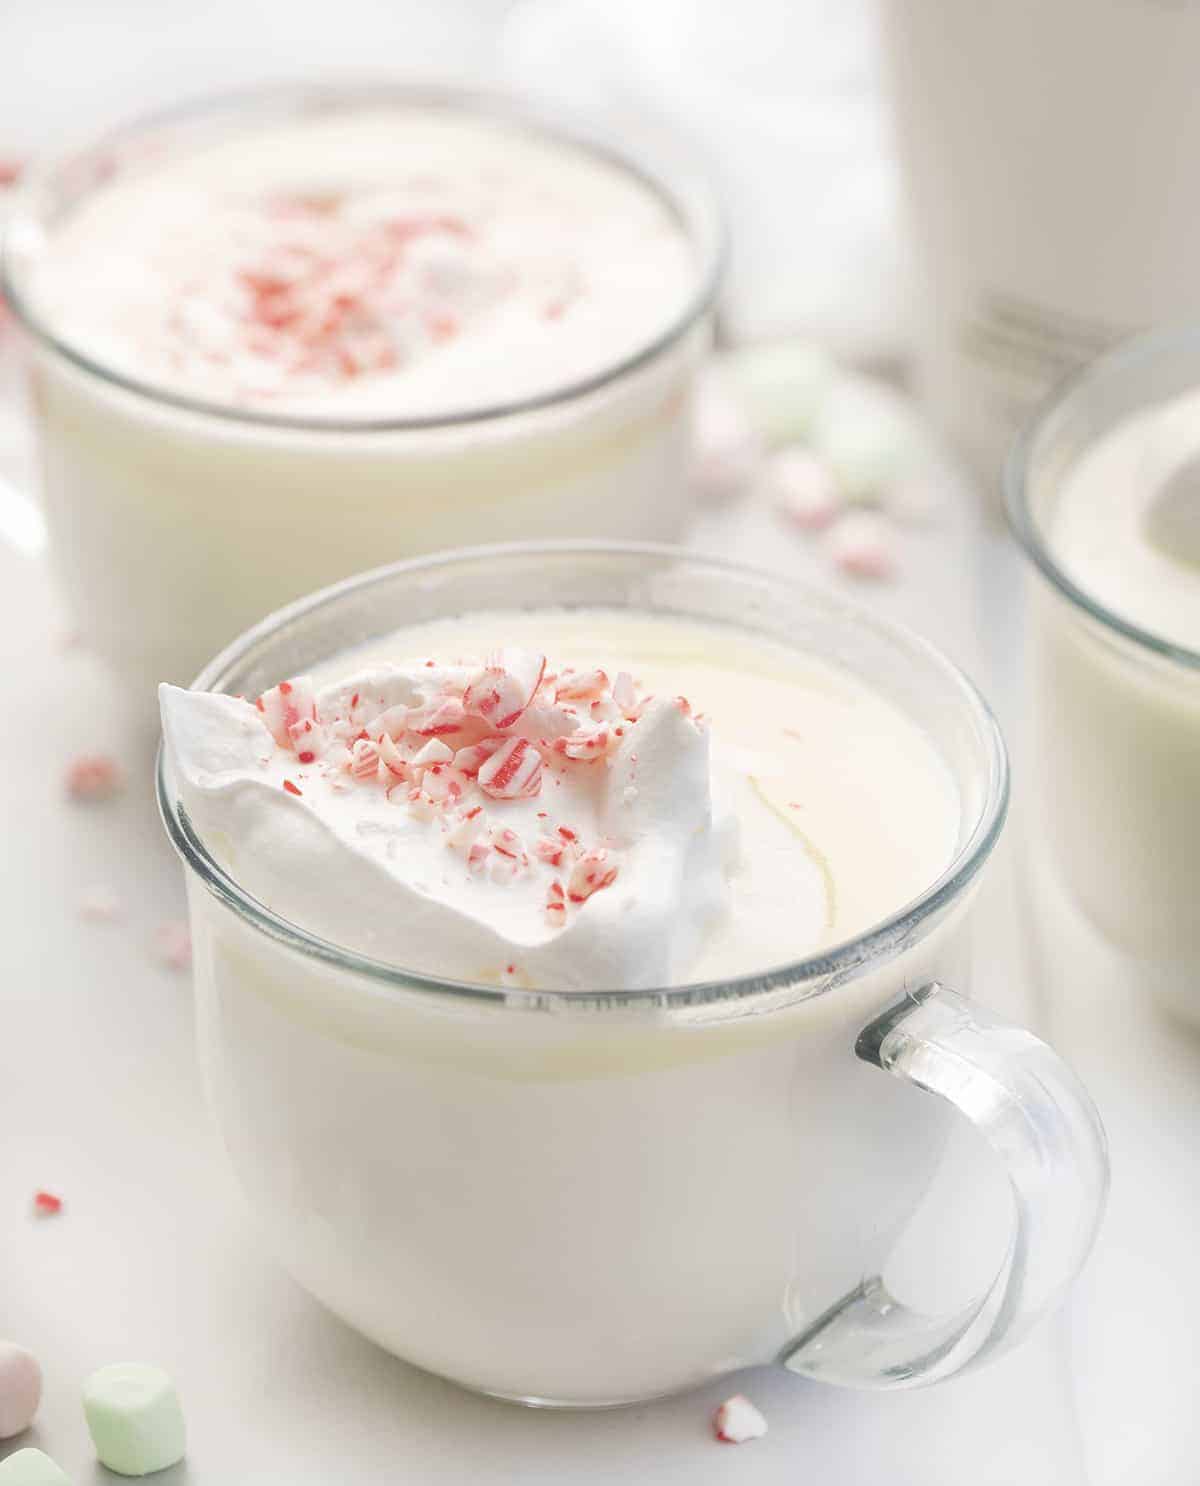 Glassed of White Chocolate Hot Cocoa with Whipped Cream and Candycanes